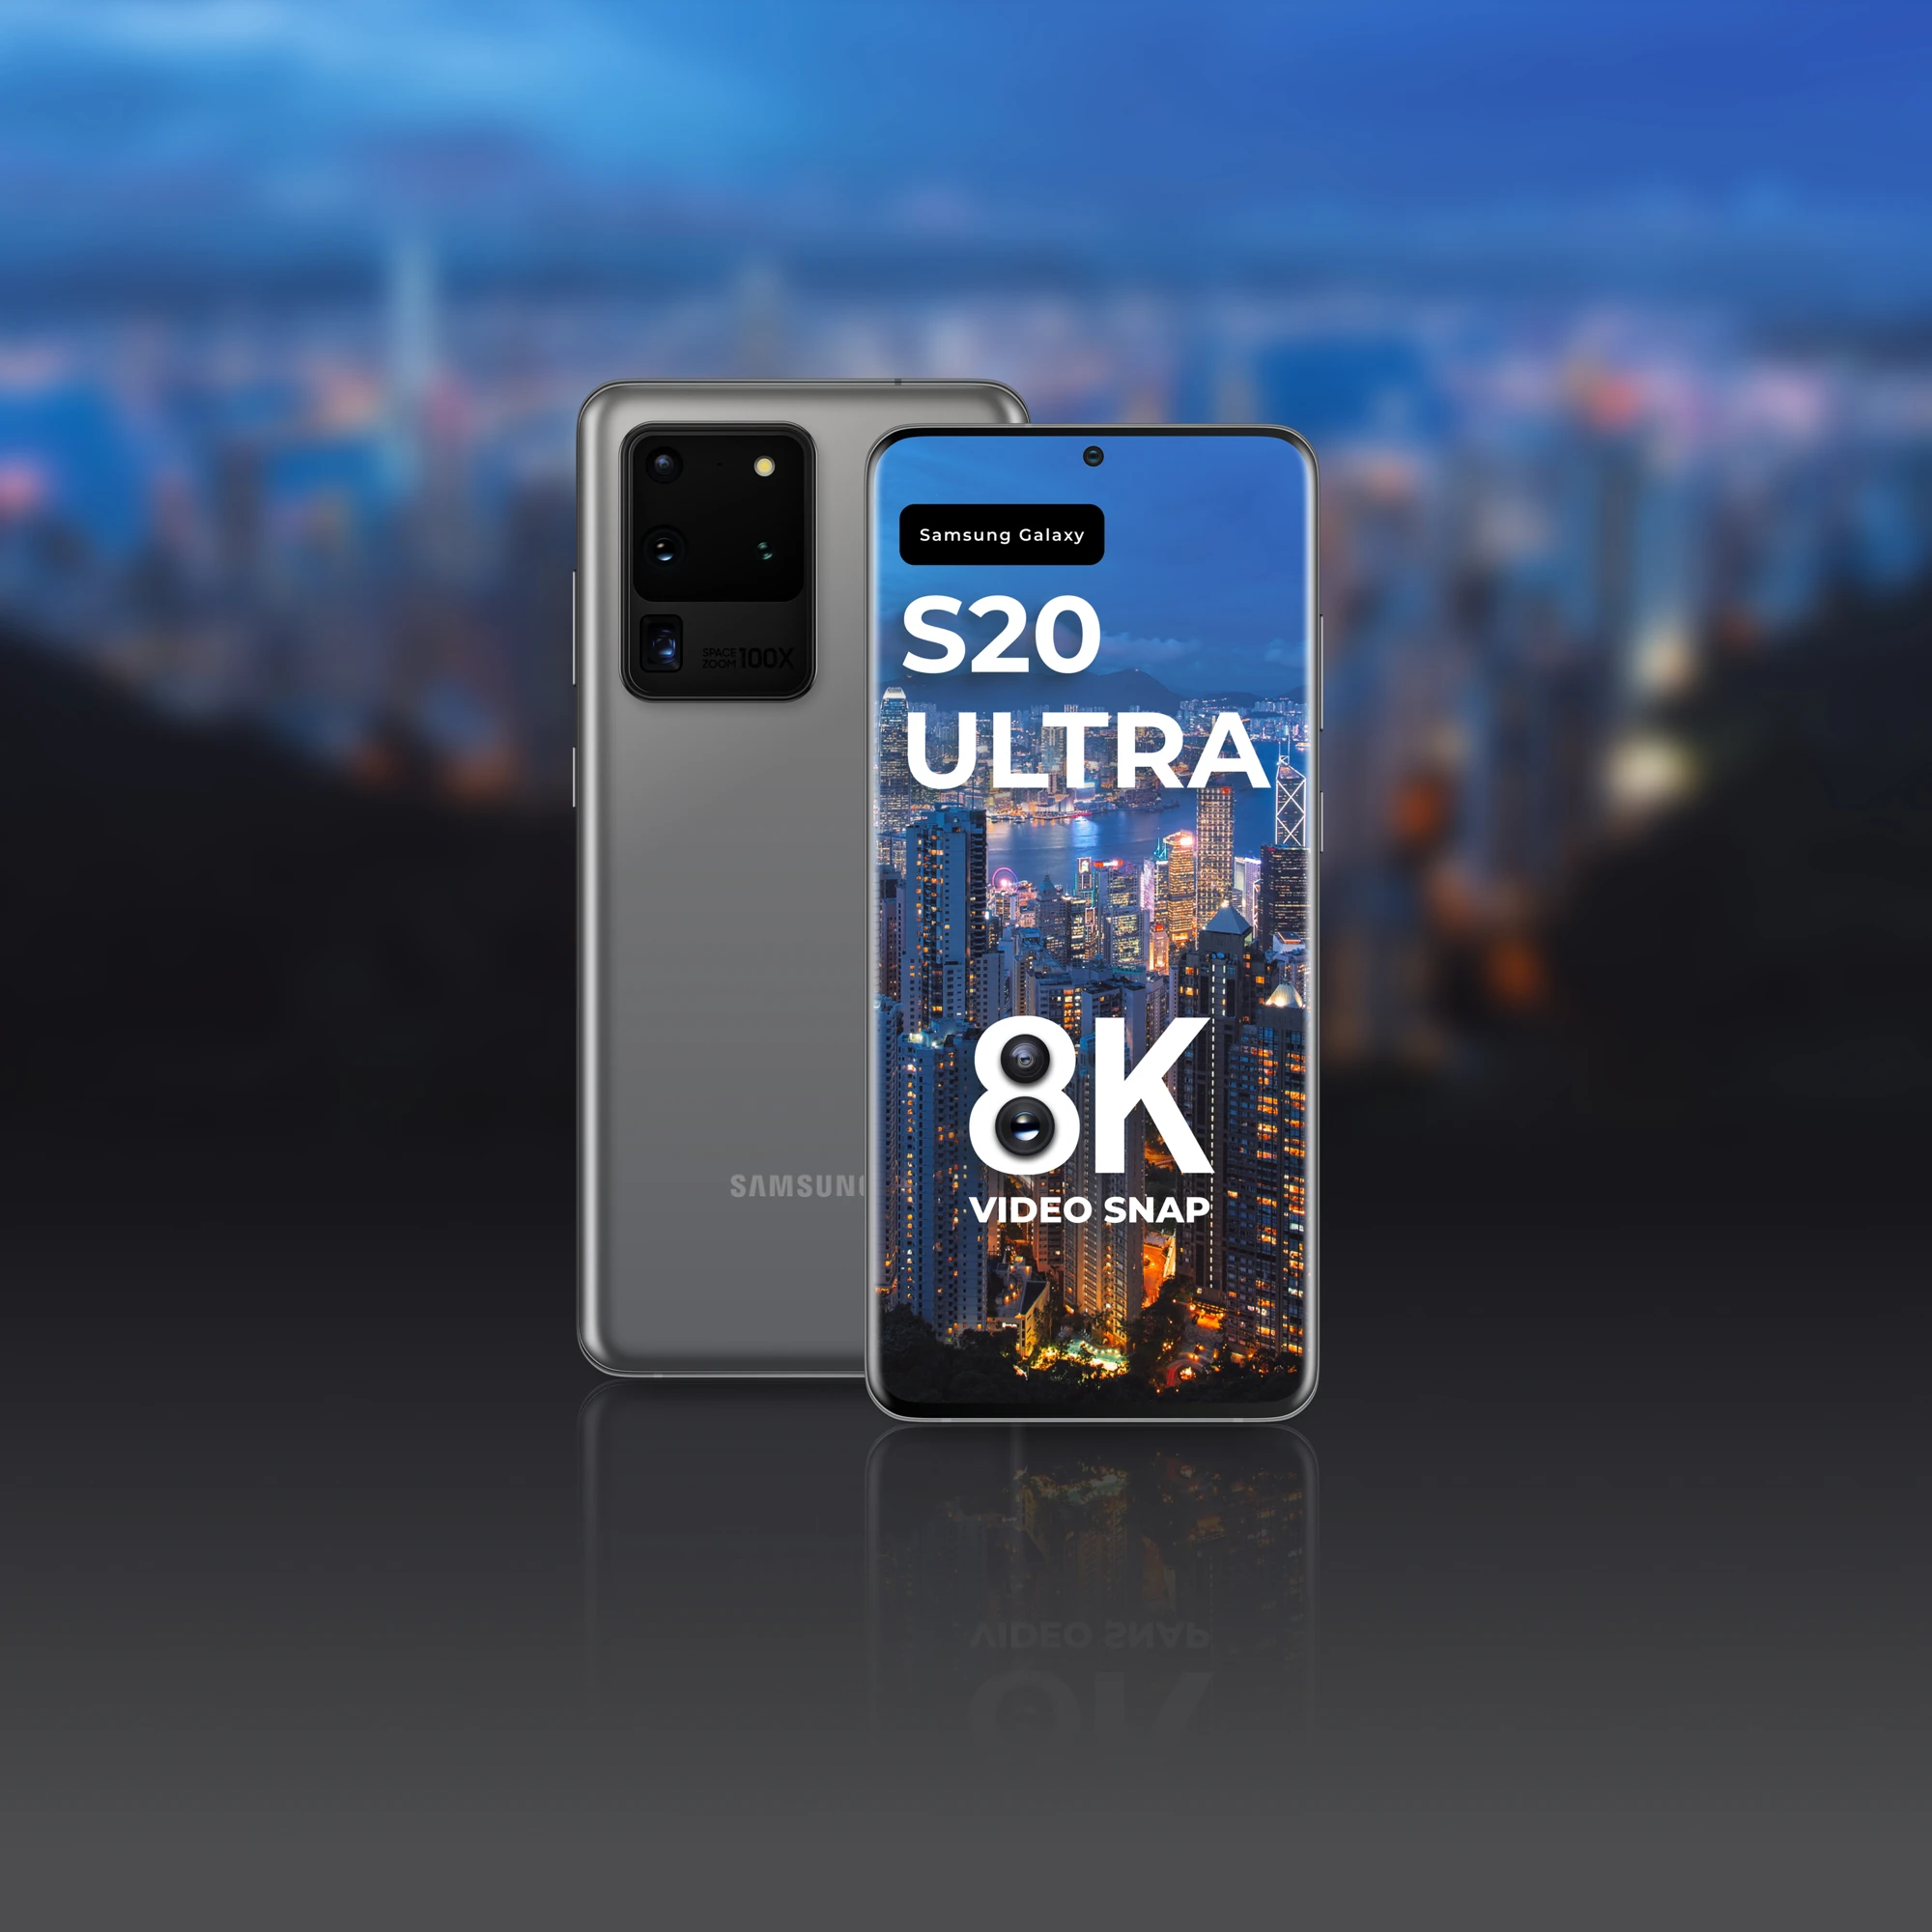 Samsung Galaxy S20 Ultra Mockup for Figma - Samsung Galaxy S20 Ultra is a brand new phone that features a great set of cameras, screen size, and a modern visual.